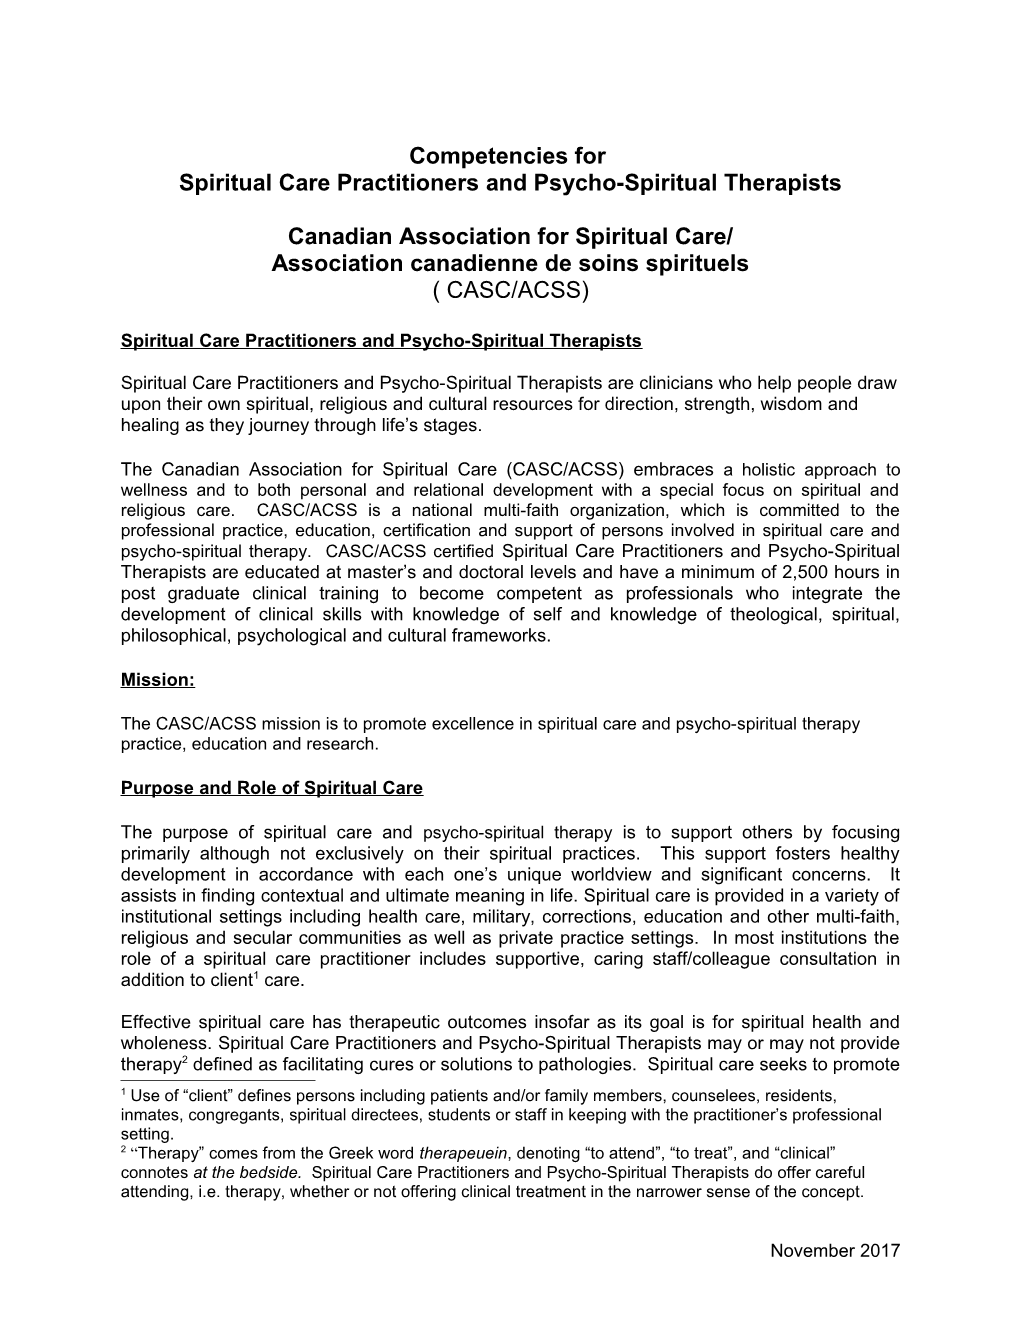 Spiritual Care Practitioners and Psycho-Spiritual Therapists